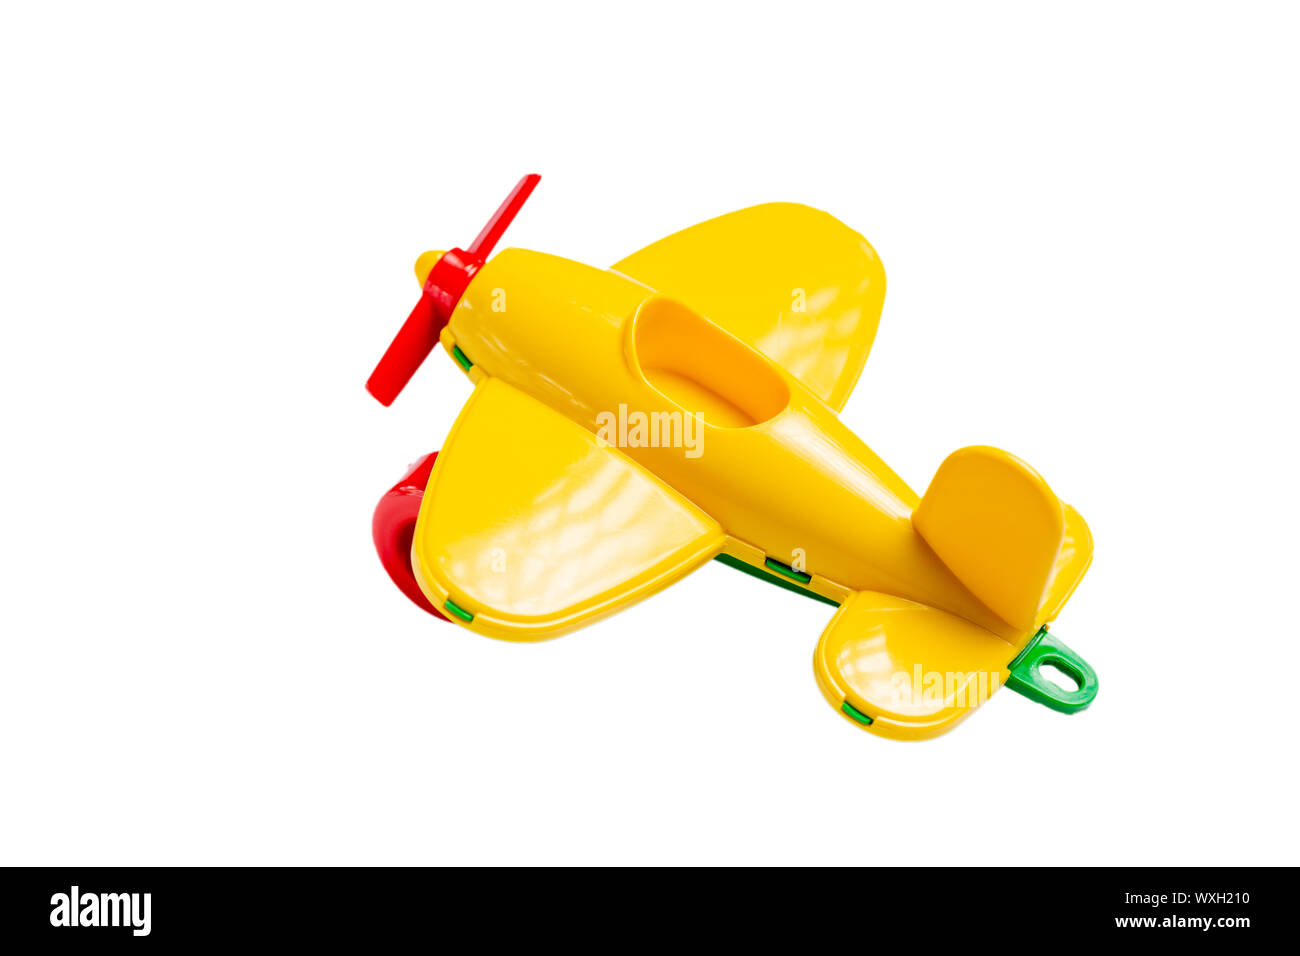 yellow toy airplane with propeller and landing gear isolate on a white background without shadow. concept of travel and flight. Stock Photo